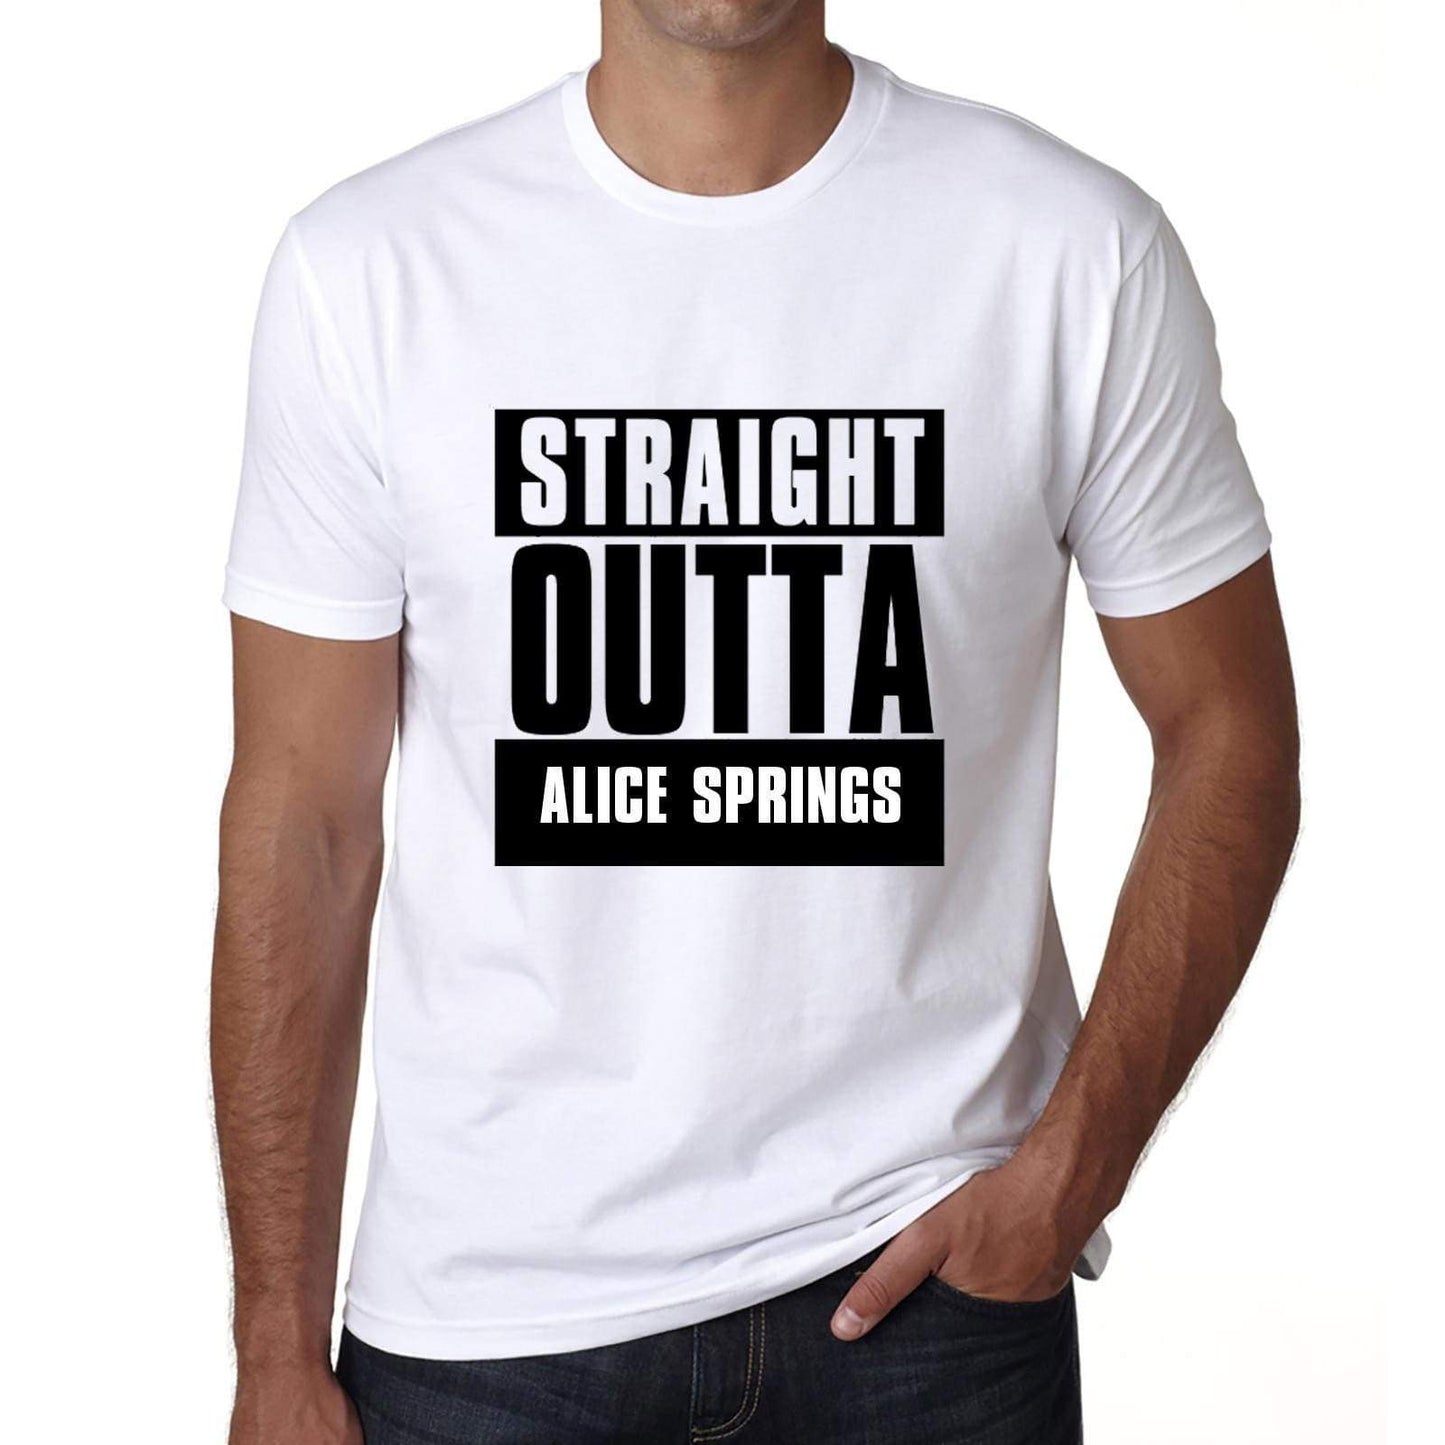 Straight Outta Alice Springs Mens Short Sleeve Round Neck T-Shirt 00027 - White / S - Casual